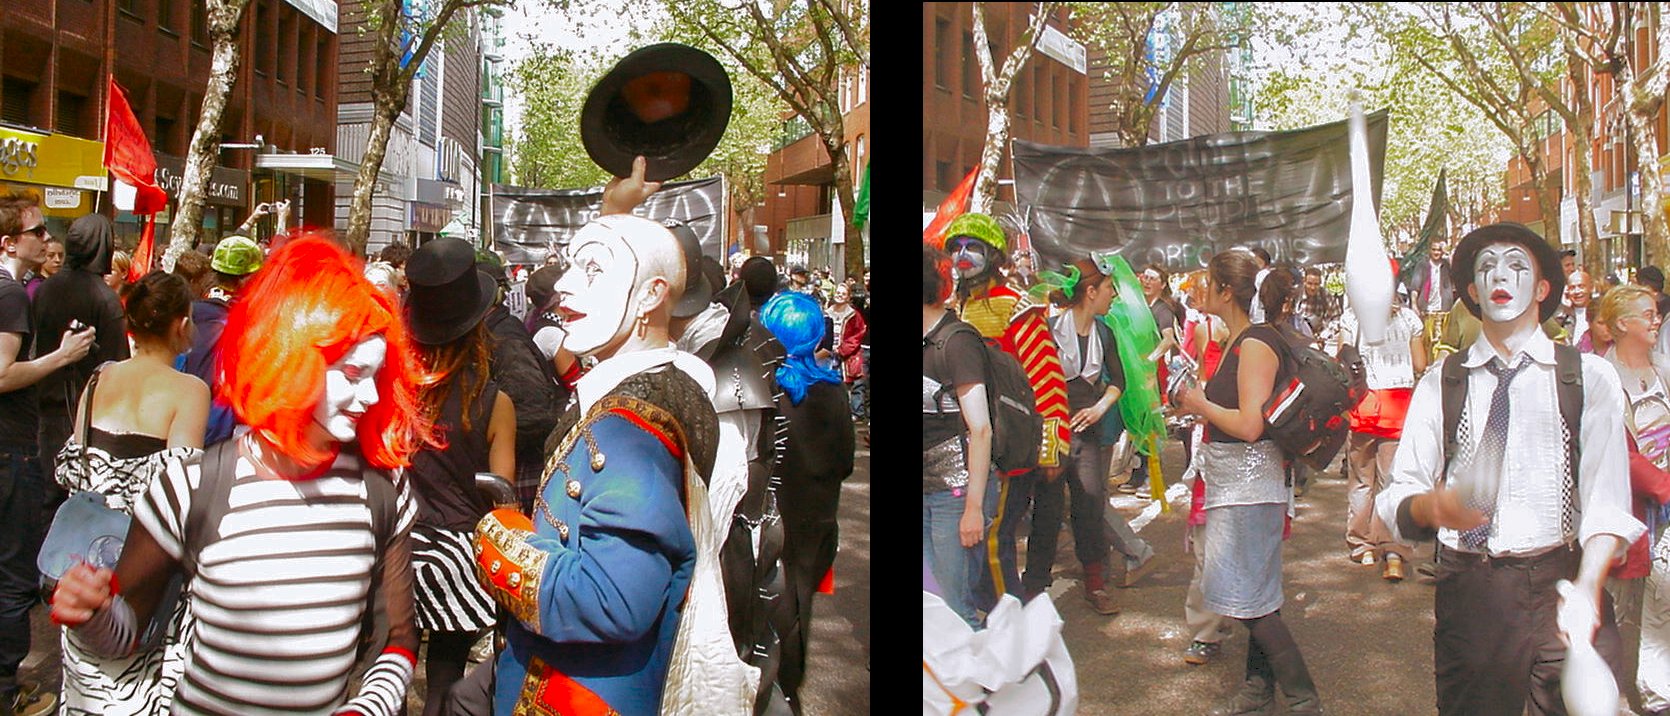 May Day 2003 in London UK - Photos